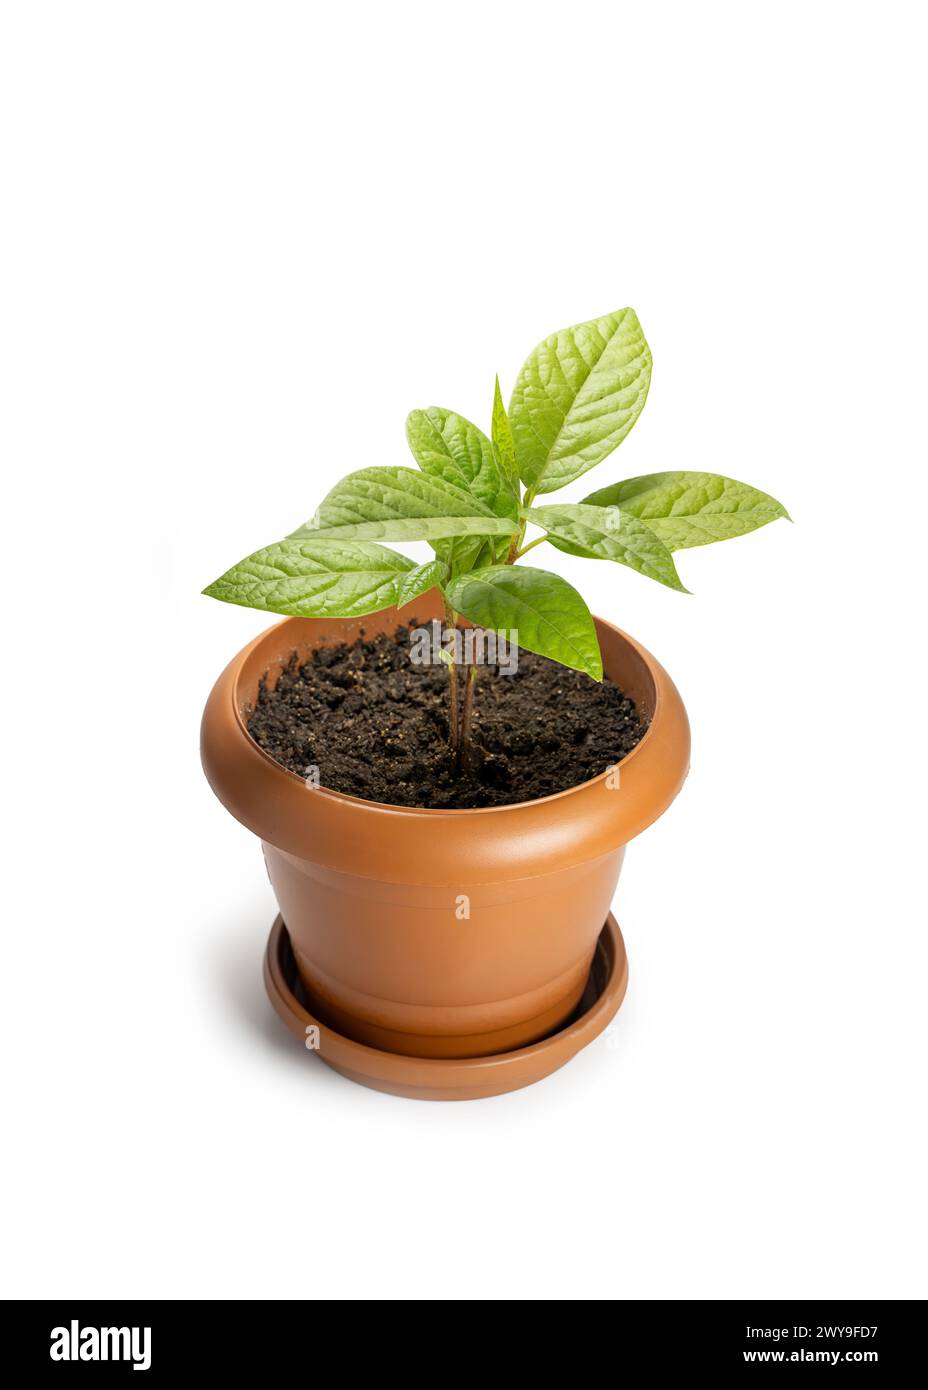 Avocado Sapling With New Leaves In A Small Plastic Pot, Isolated On White Surface Stock Photo